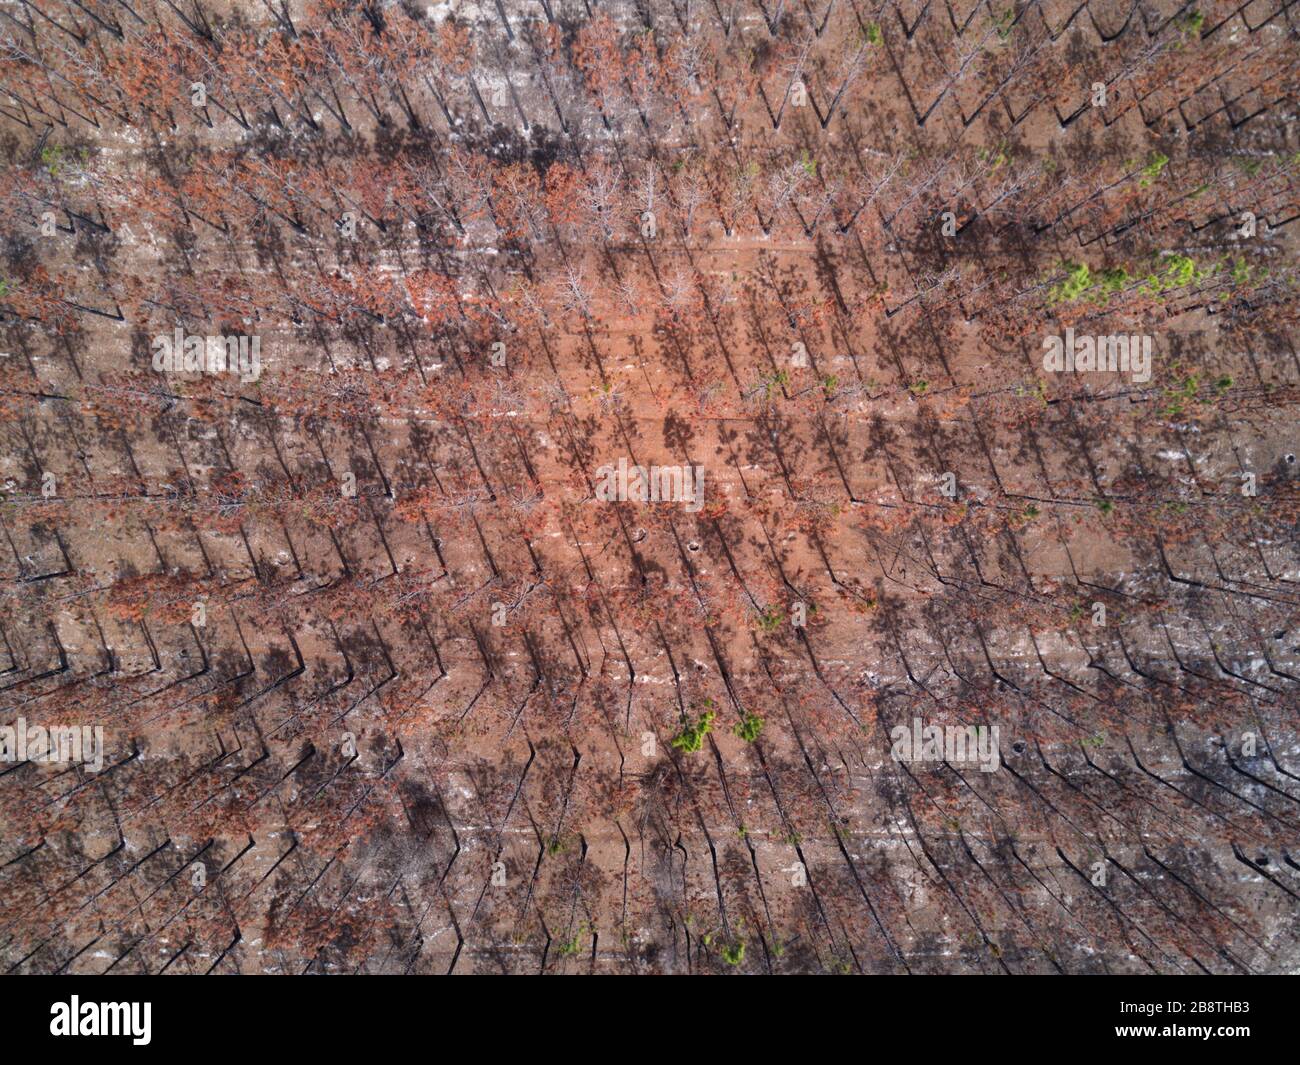 Aerial of commercial pine plantation recently burnt during summer bush fires showing signs of regrowth near Childers Queensland Australia Stock Photo